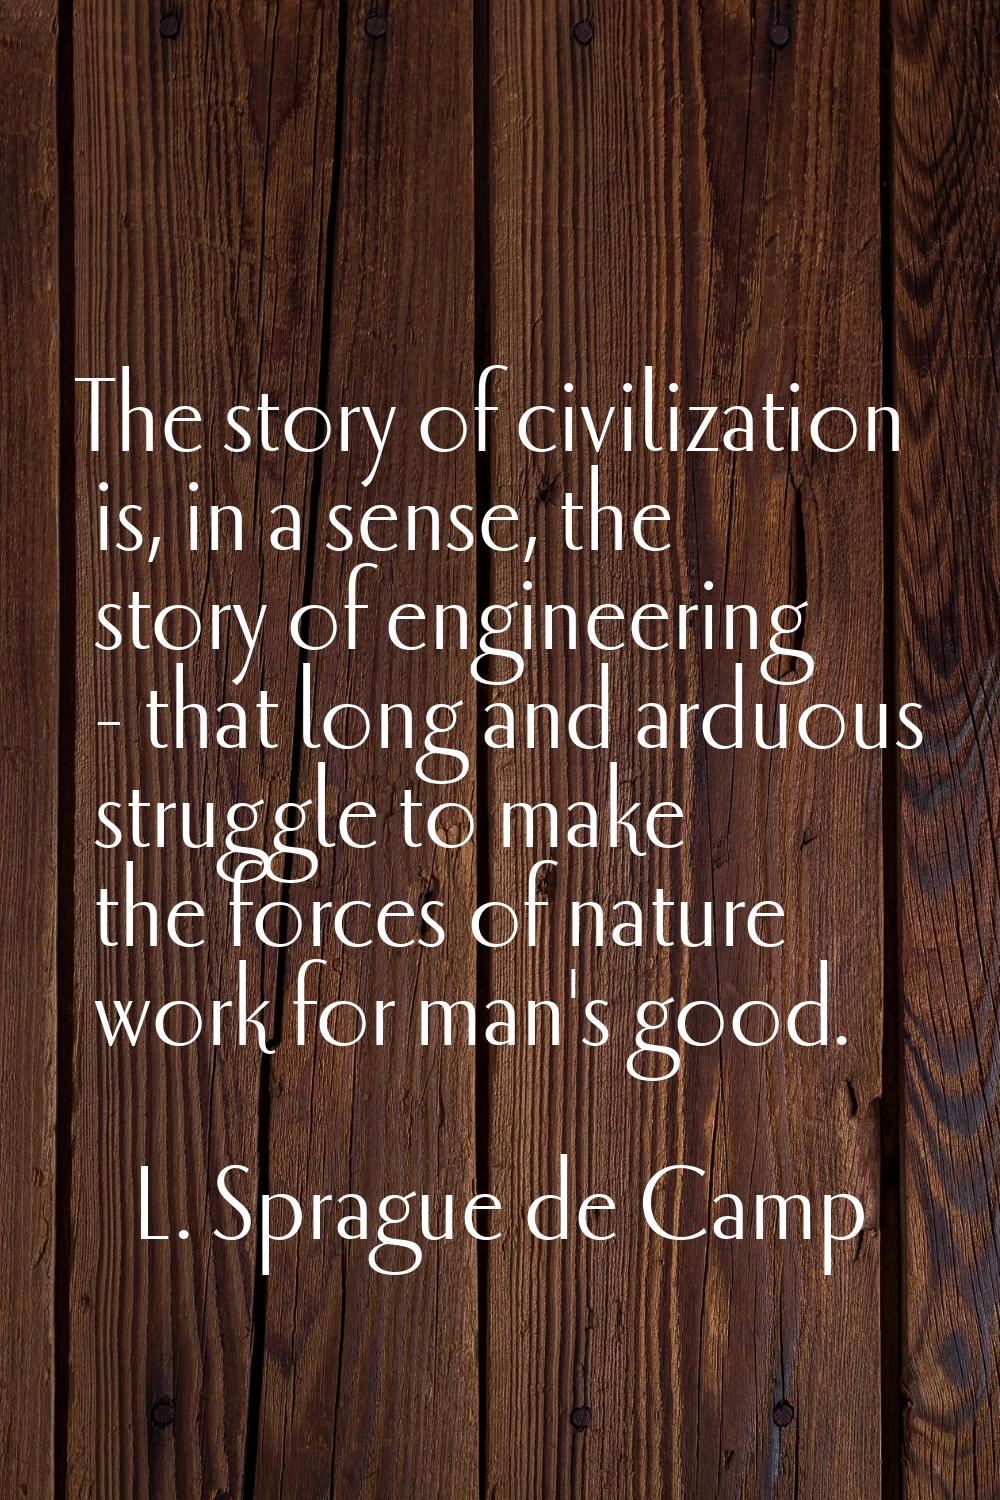 The story of civilization is, in a sense, the story of engineering - that long and arduous struggle